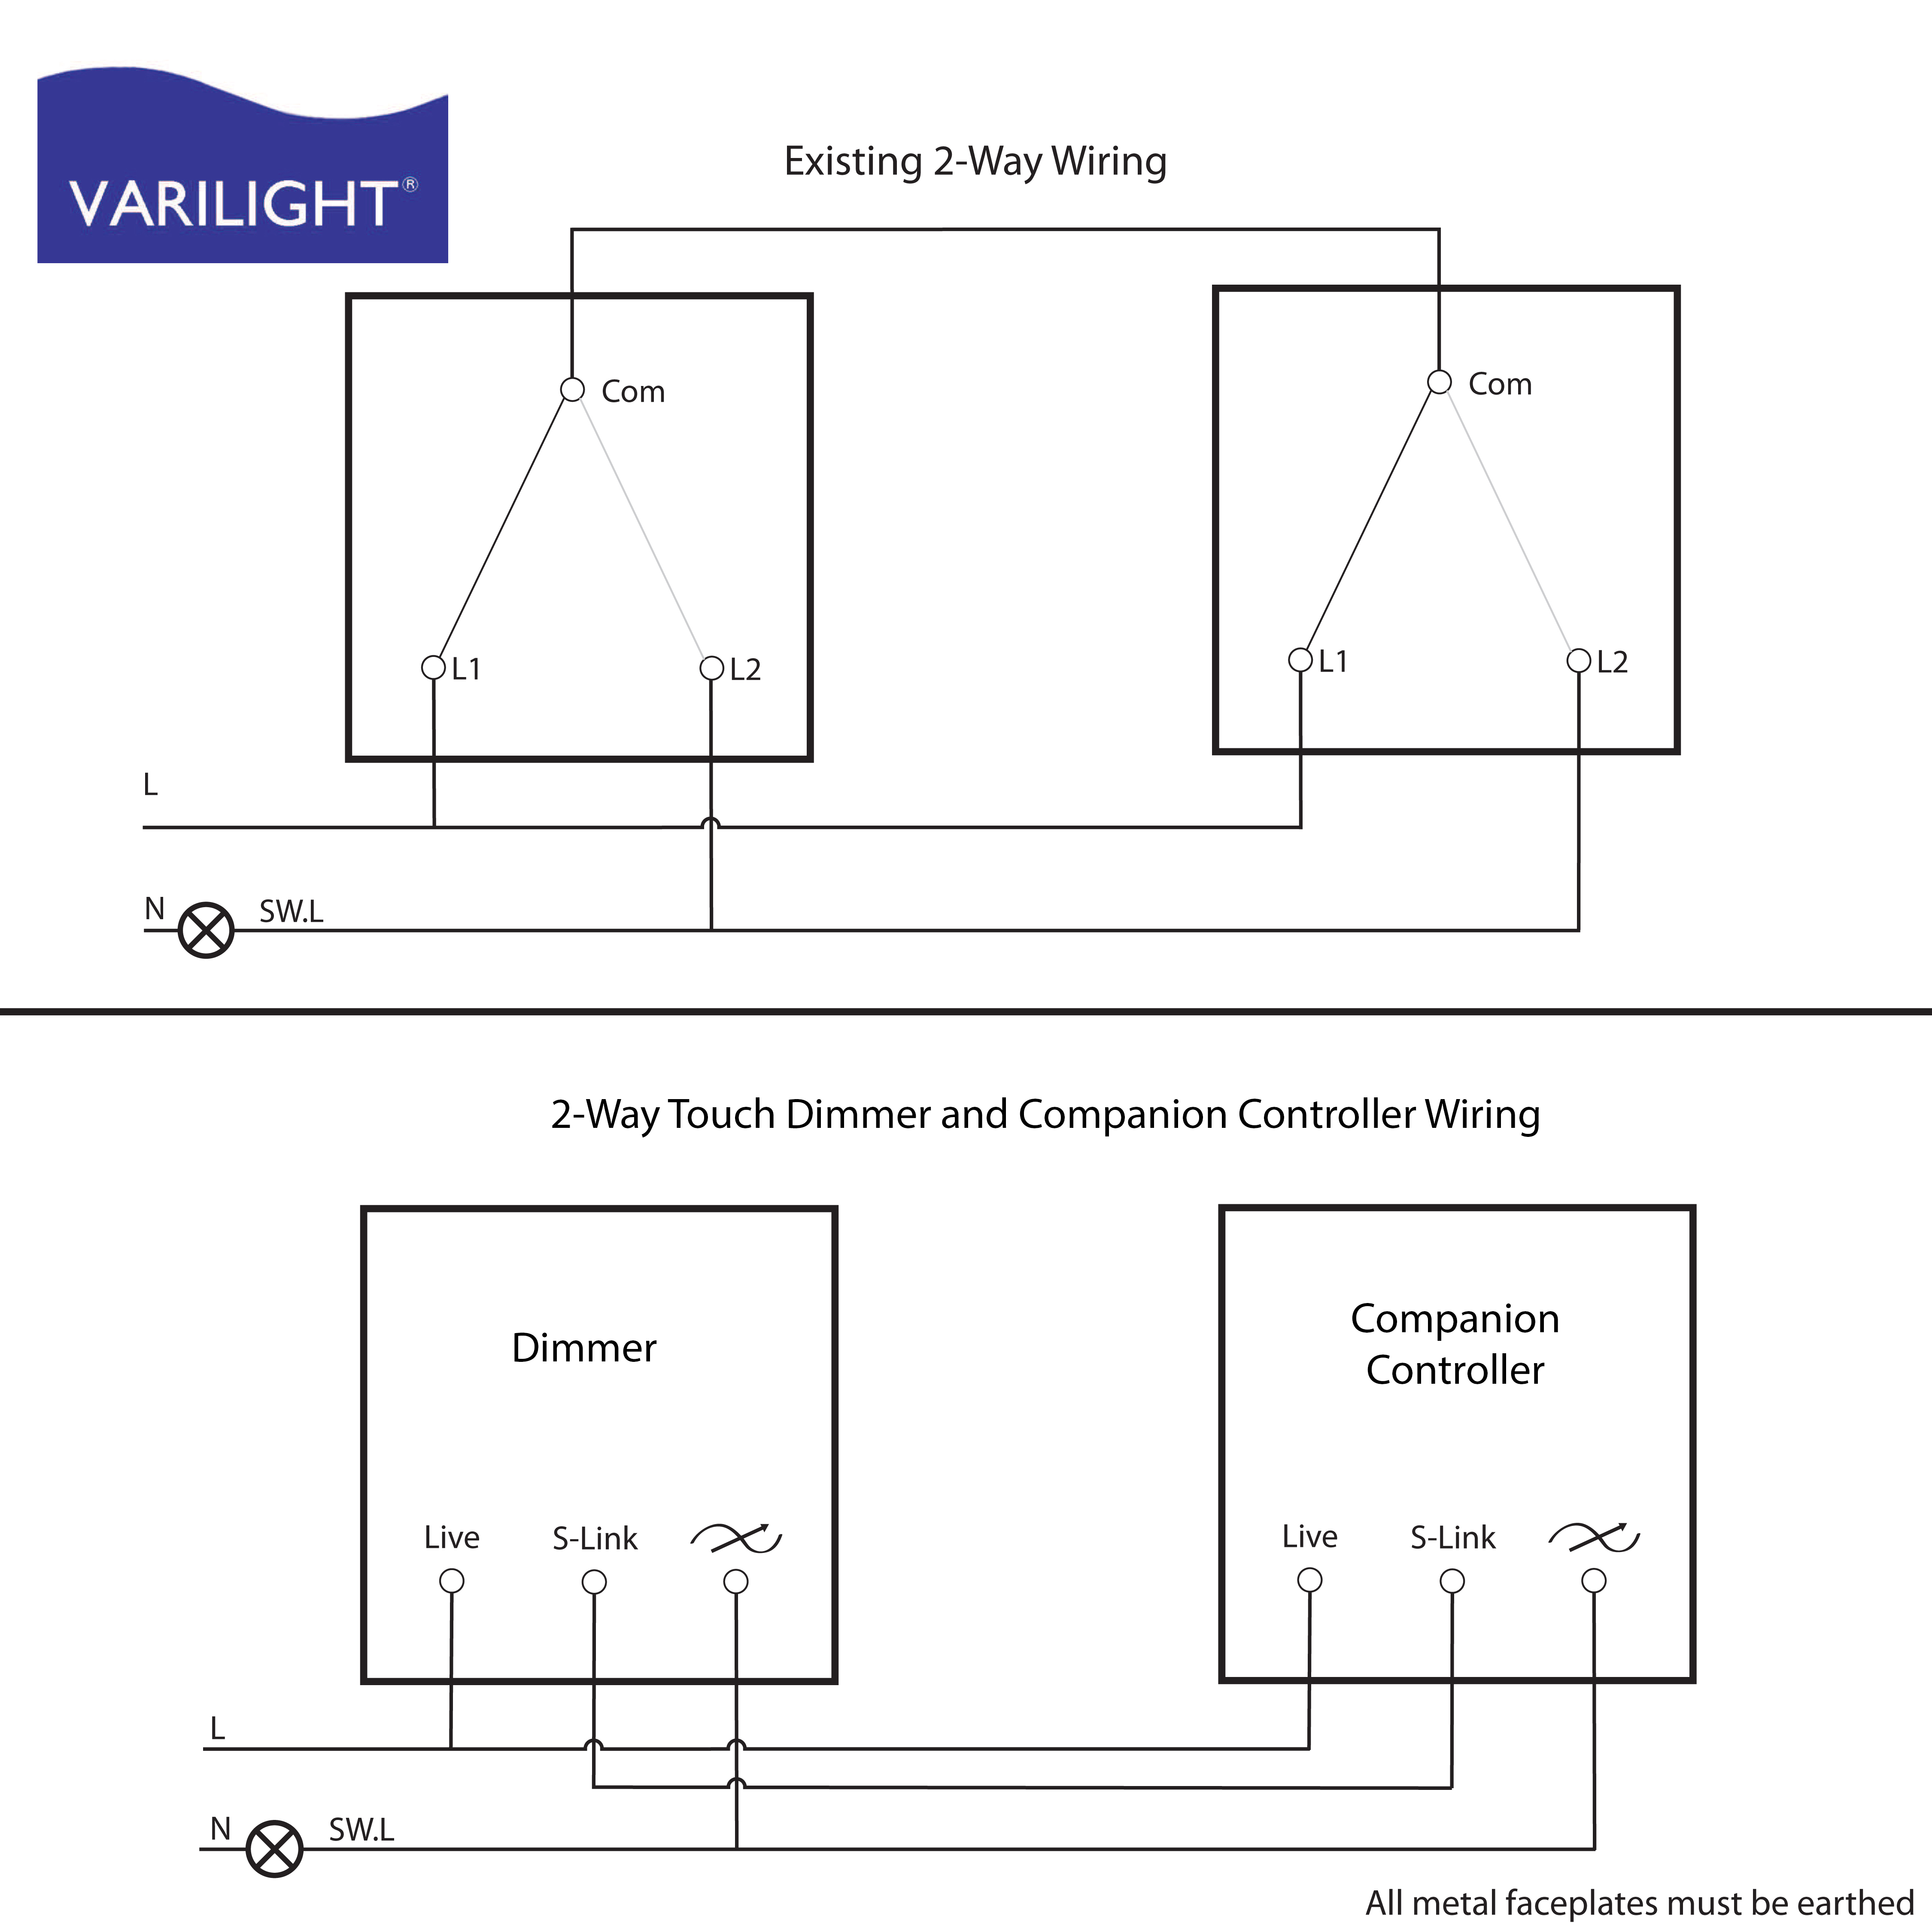 3 Way Dimmer And Switch Wiring Diagram from www.varilight.co.uk